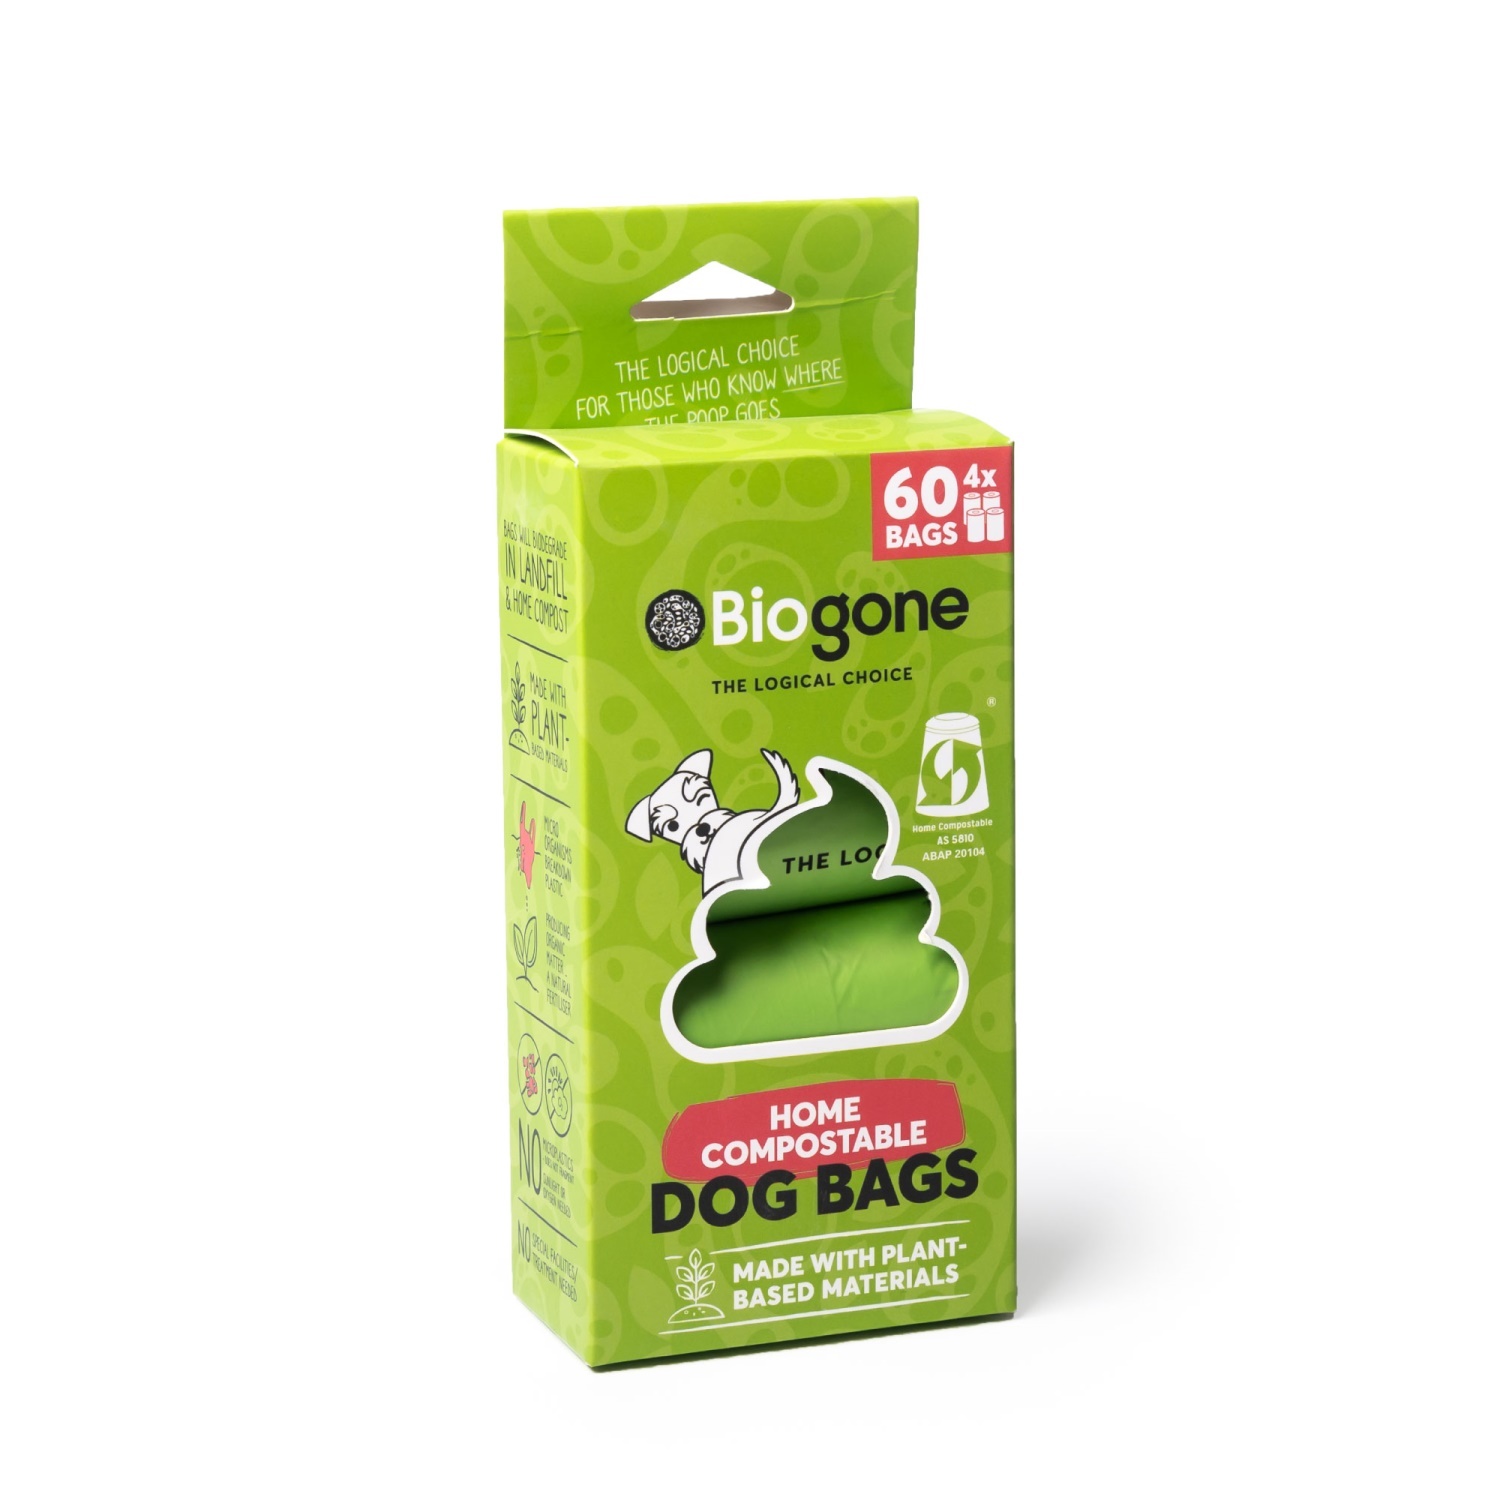 Bio-Gone Home Compostable Dog Waste Bags - 3, 4 or 8 Rolls (60/80/120 Bags) image 0